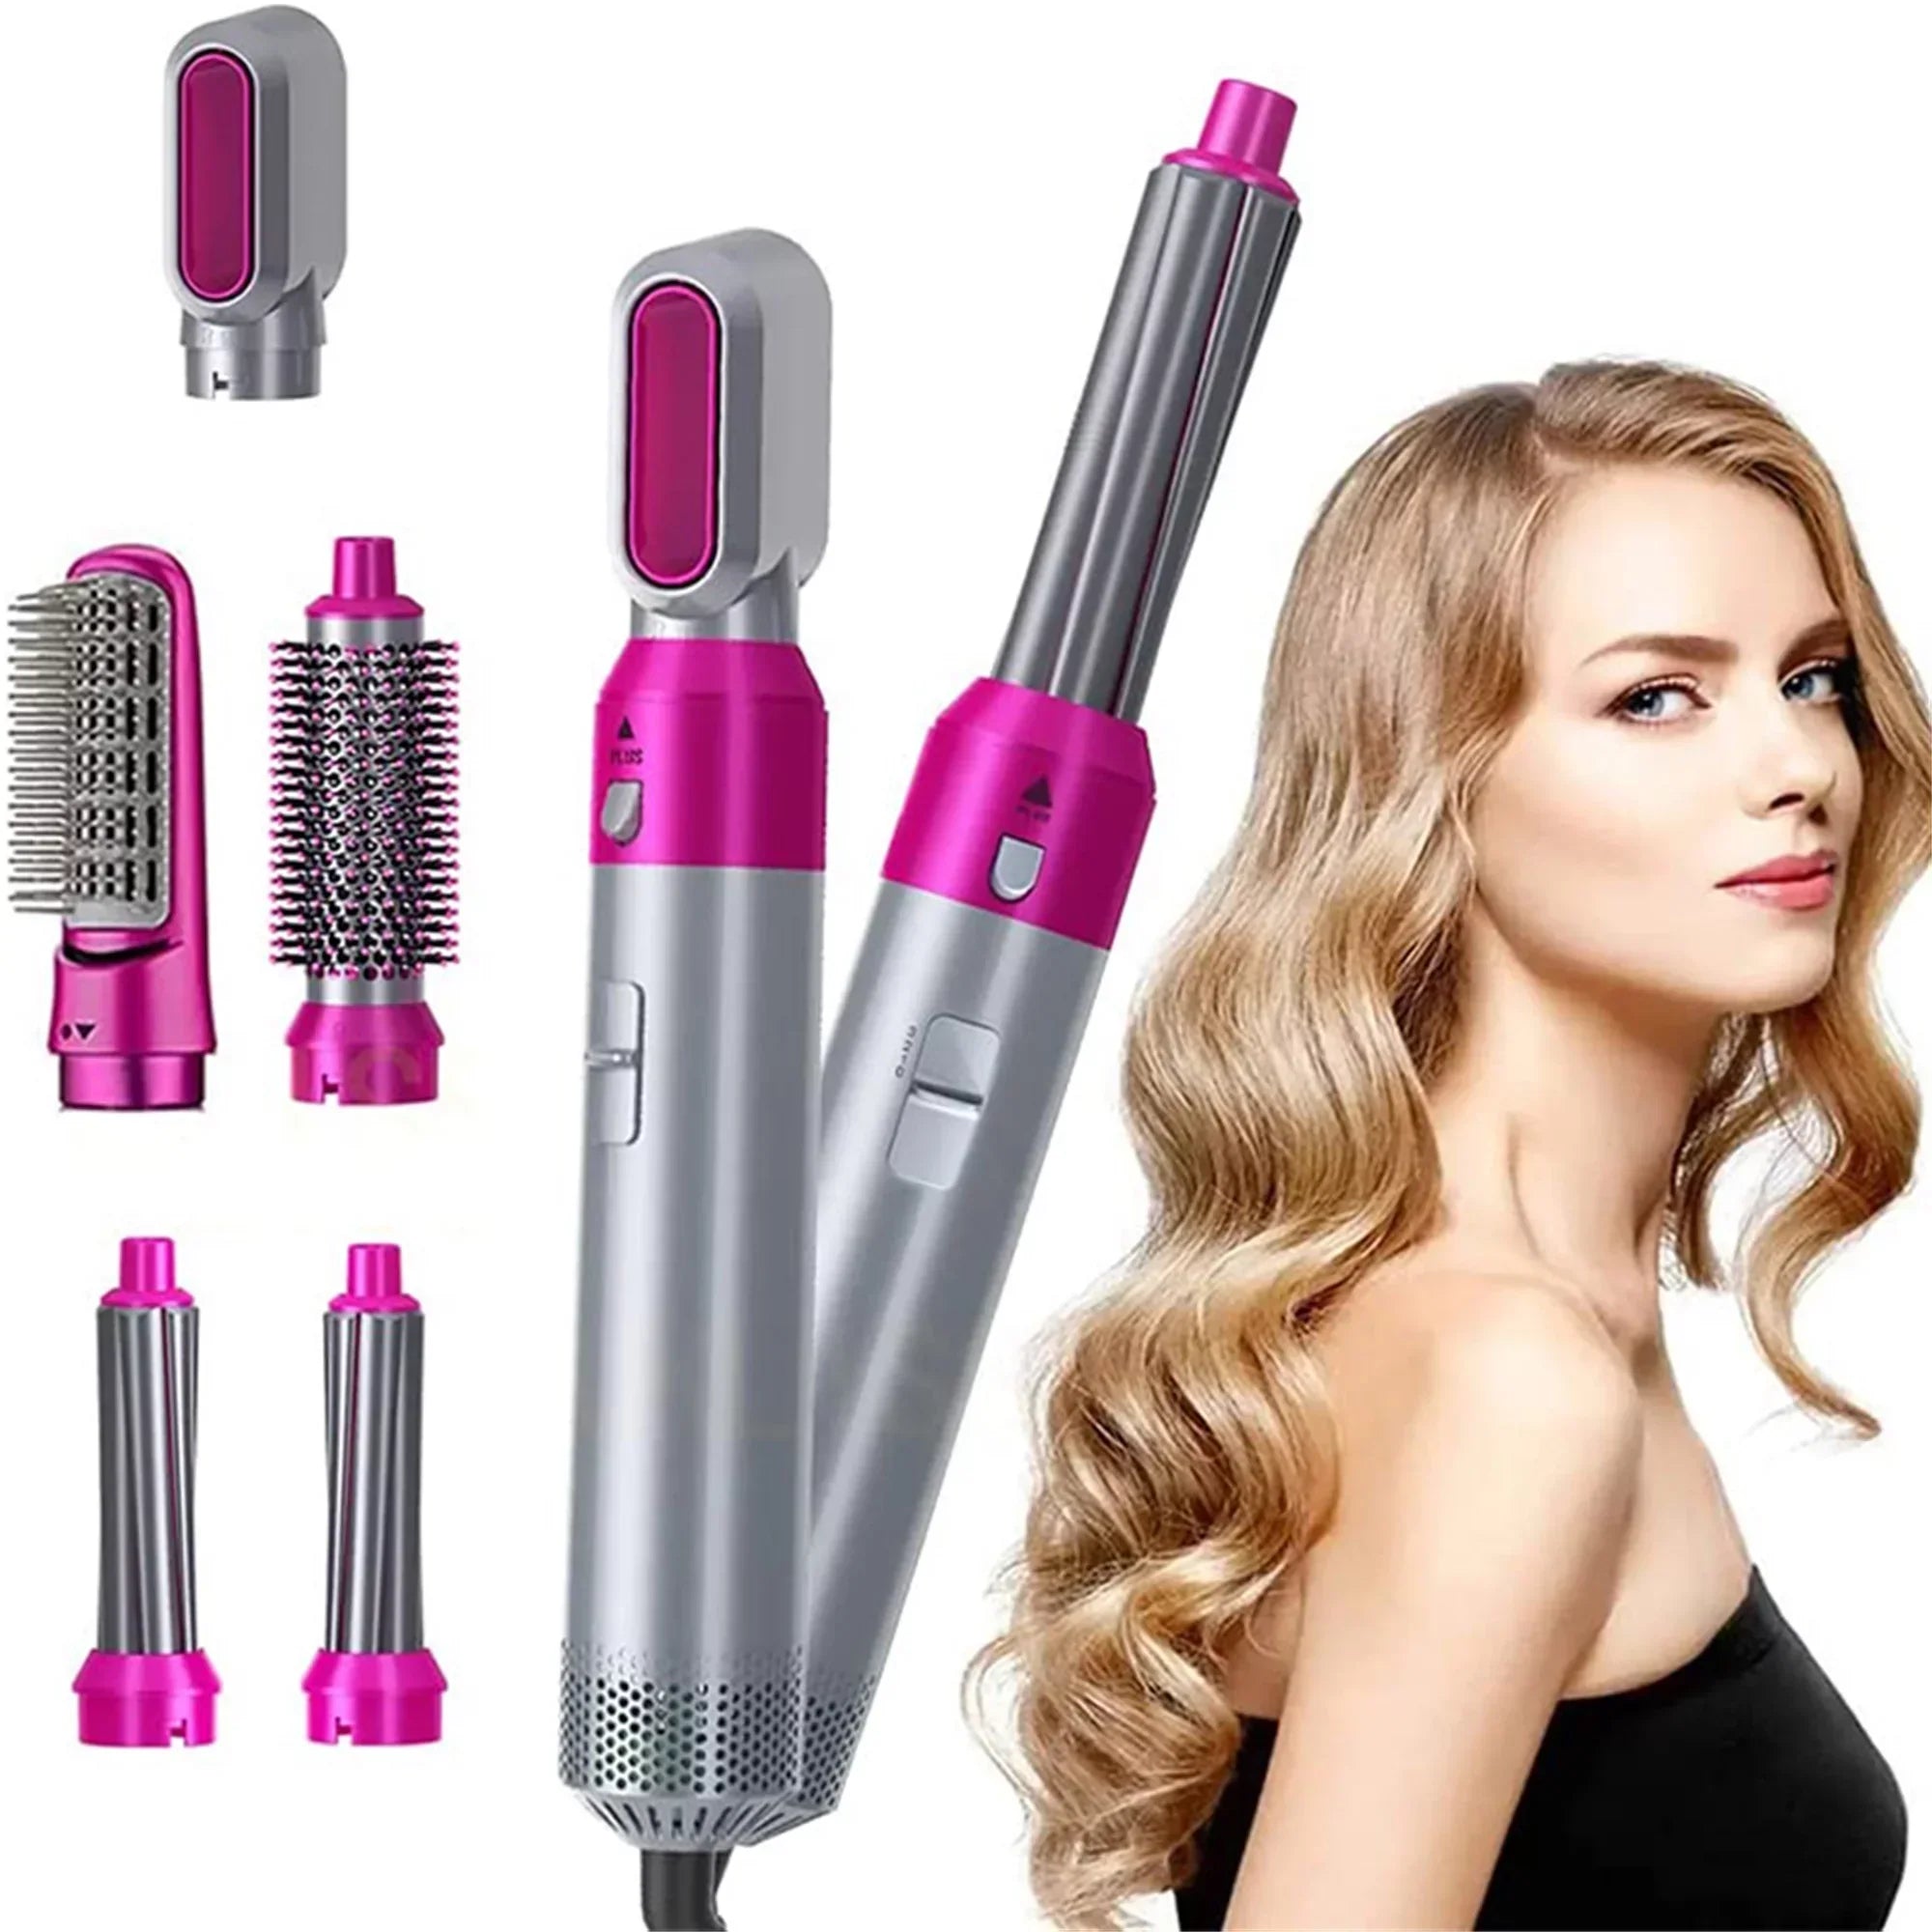 5 in 1 Multifunctional Automatic Airwrap Hair Styling Tool By Shoppers Cruse